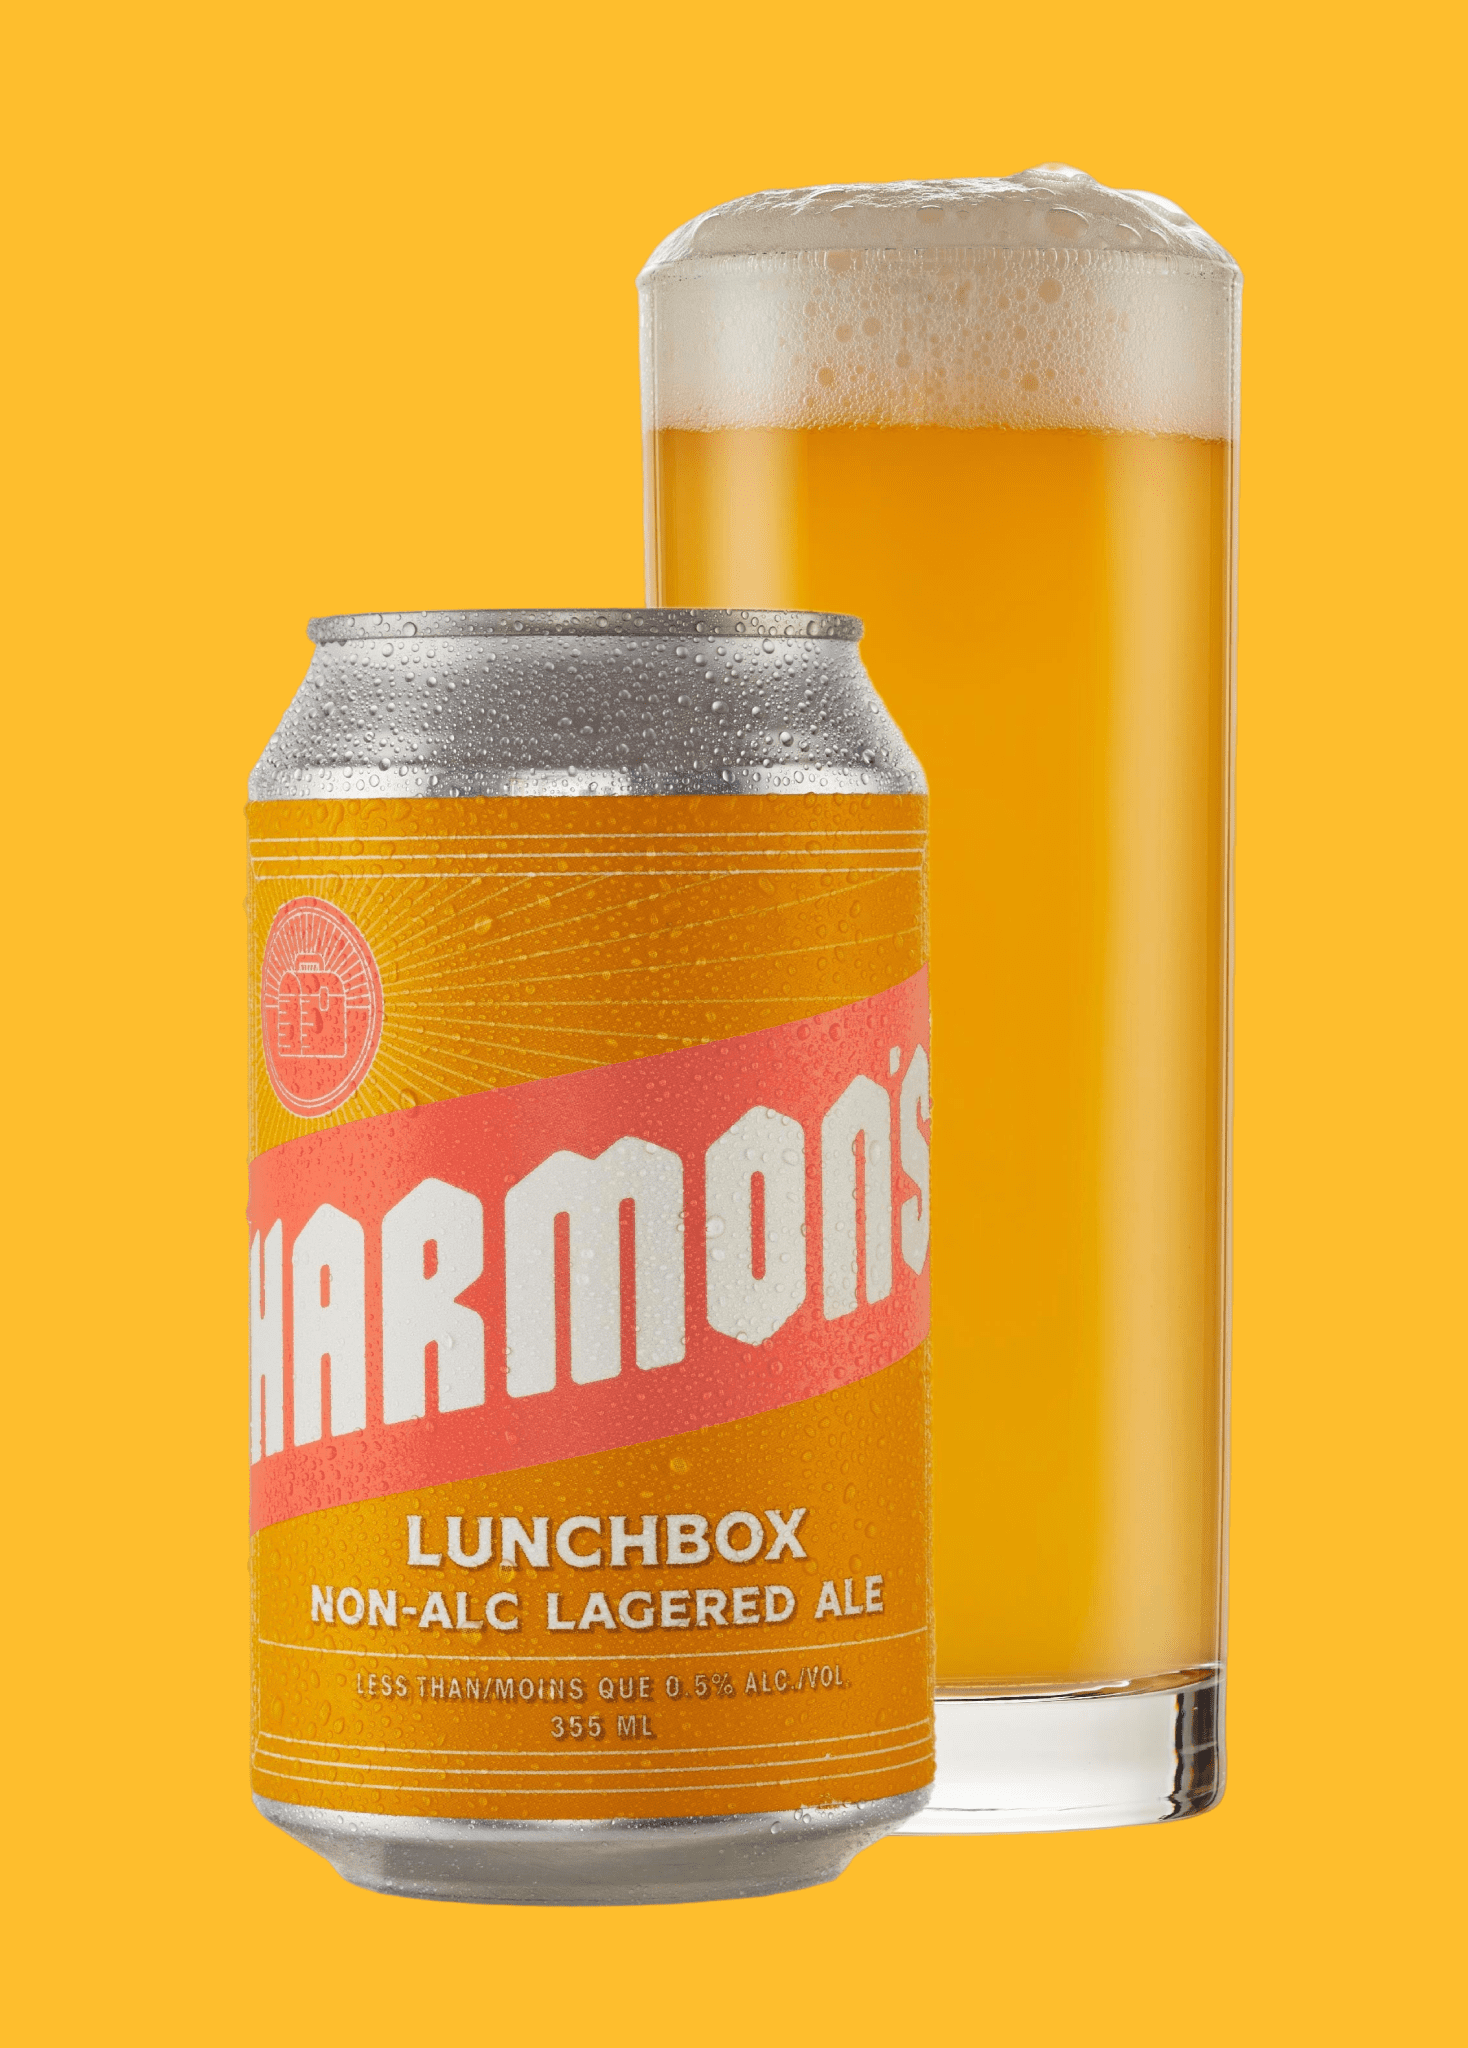 Harmon's Lunchbox Non-Alc Lagered Ale